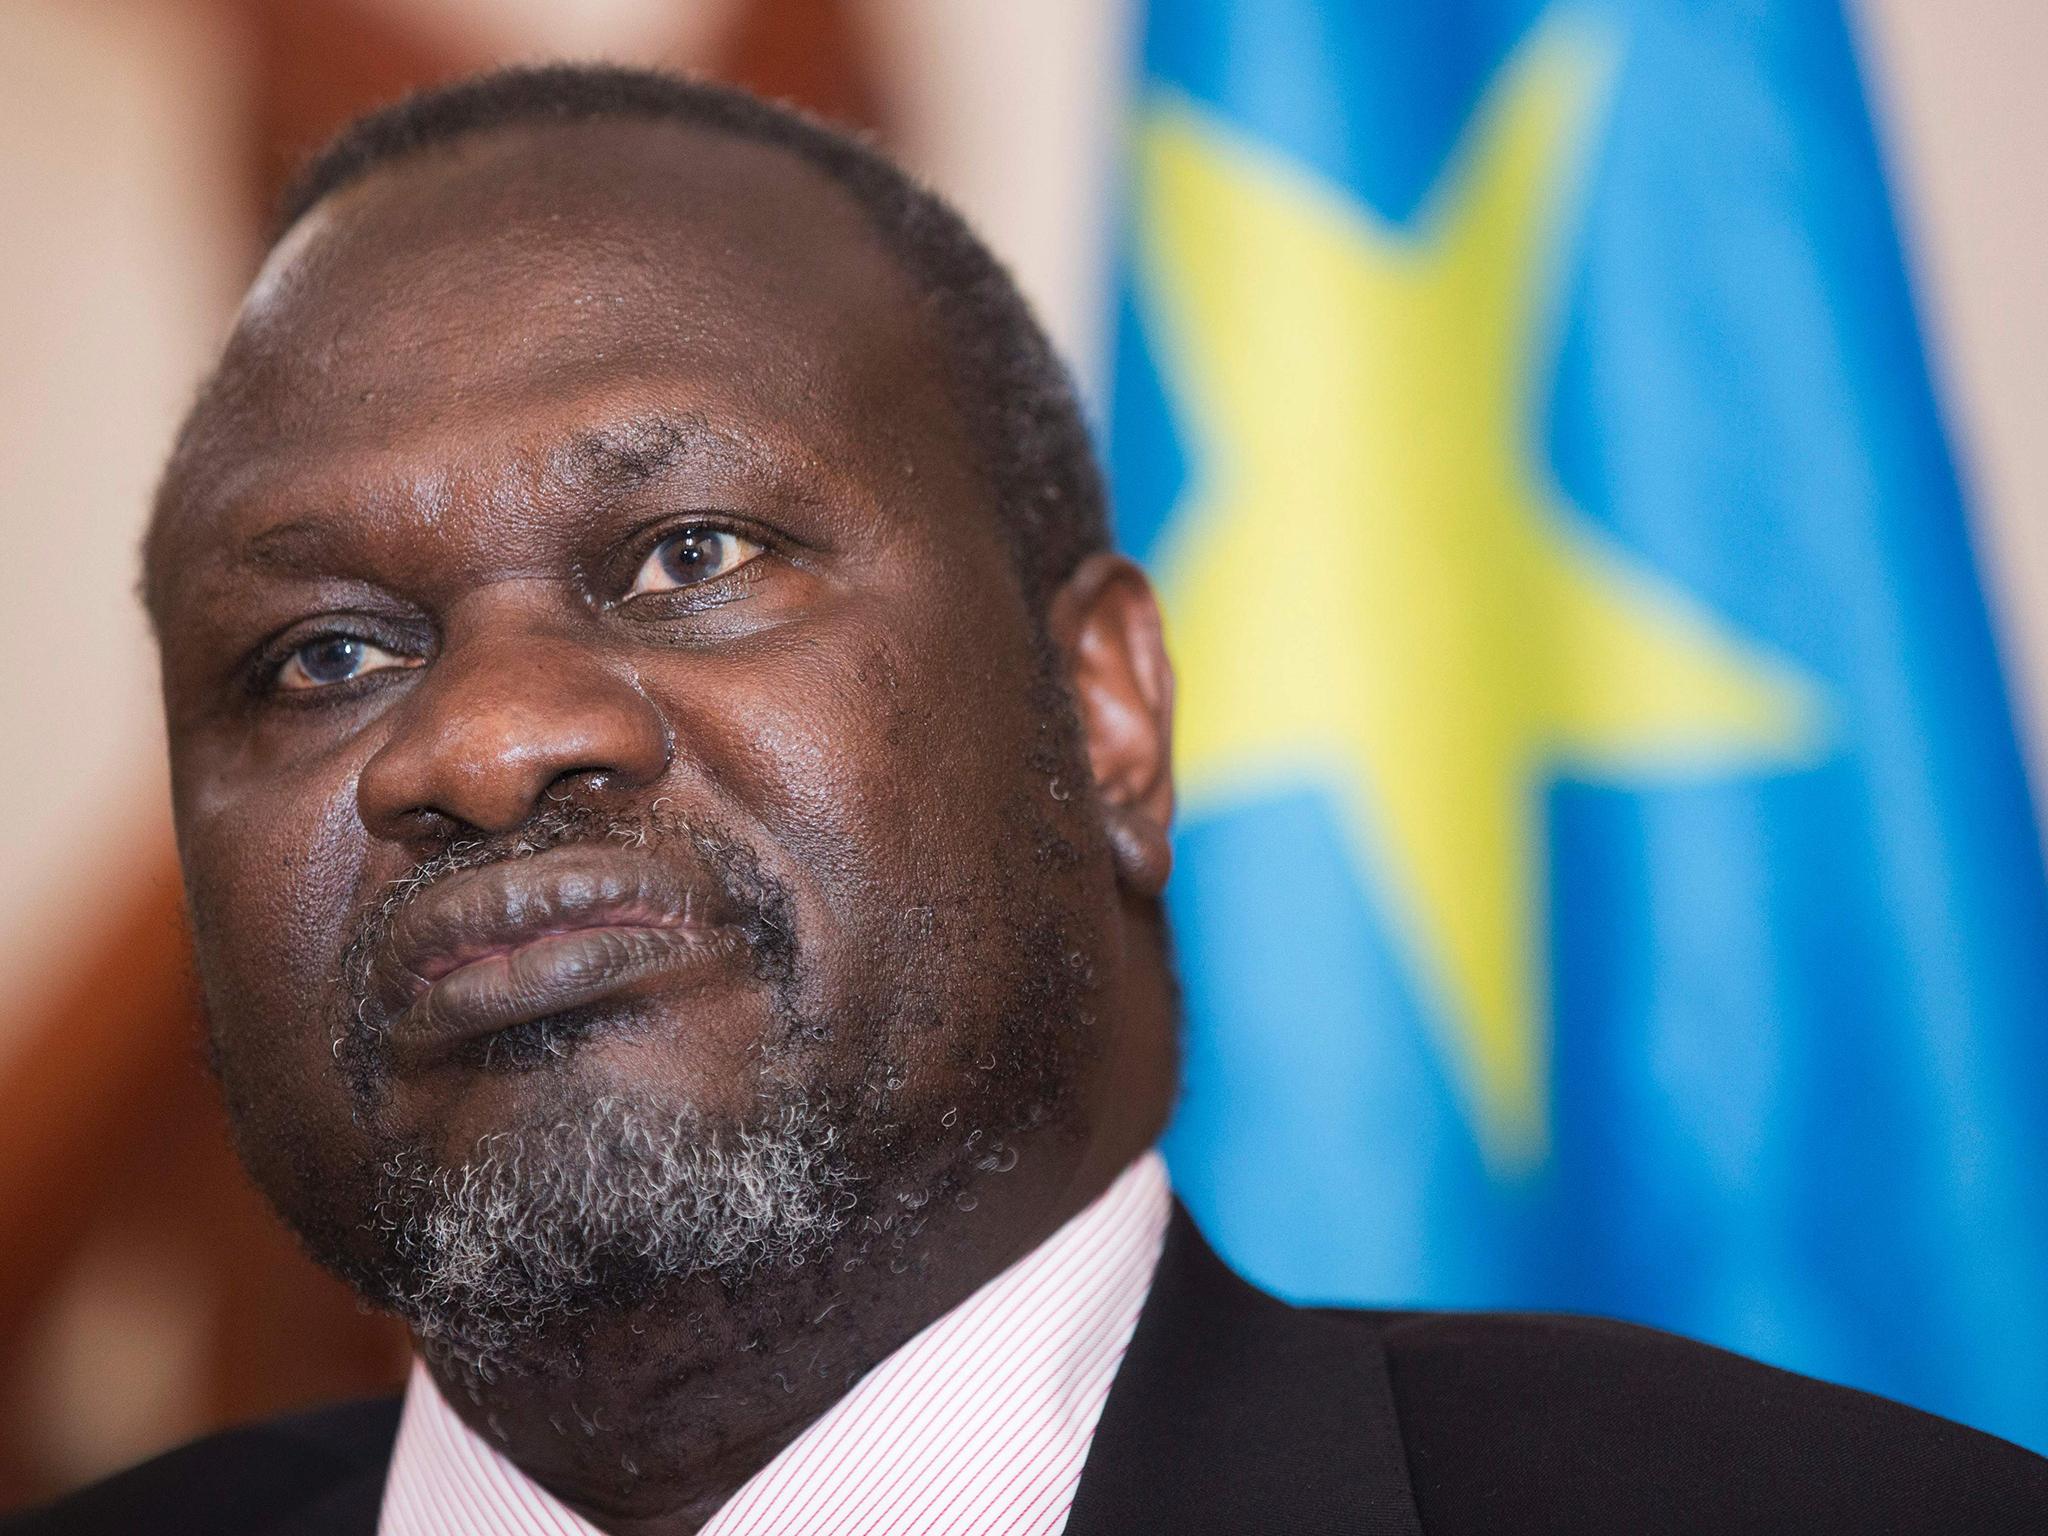 SPLM-IO says Machar is ‘not free to move’